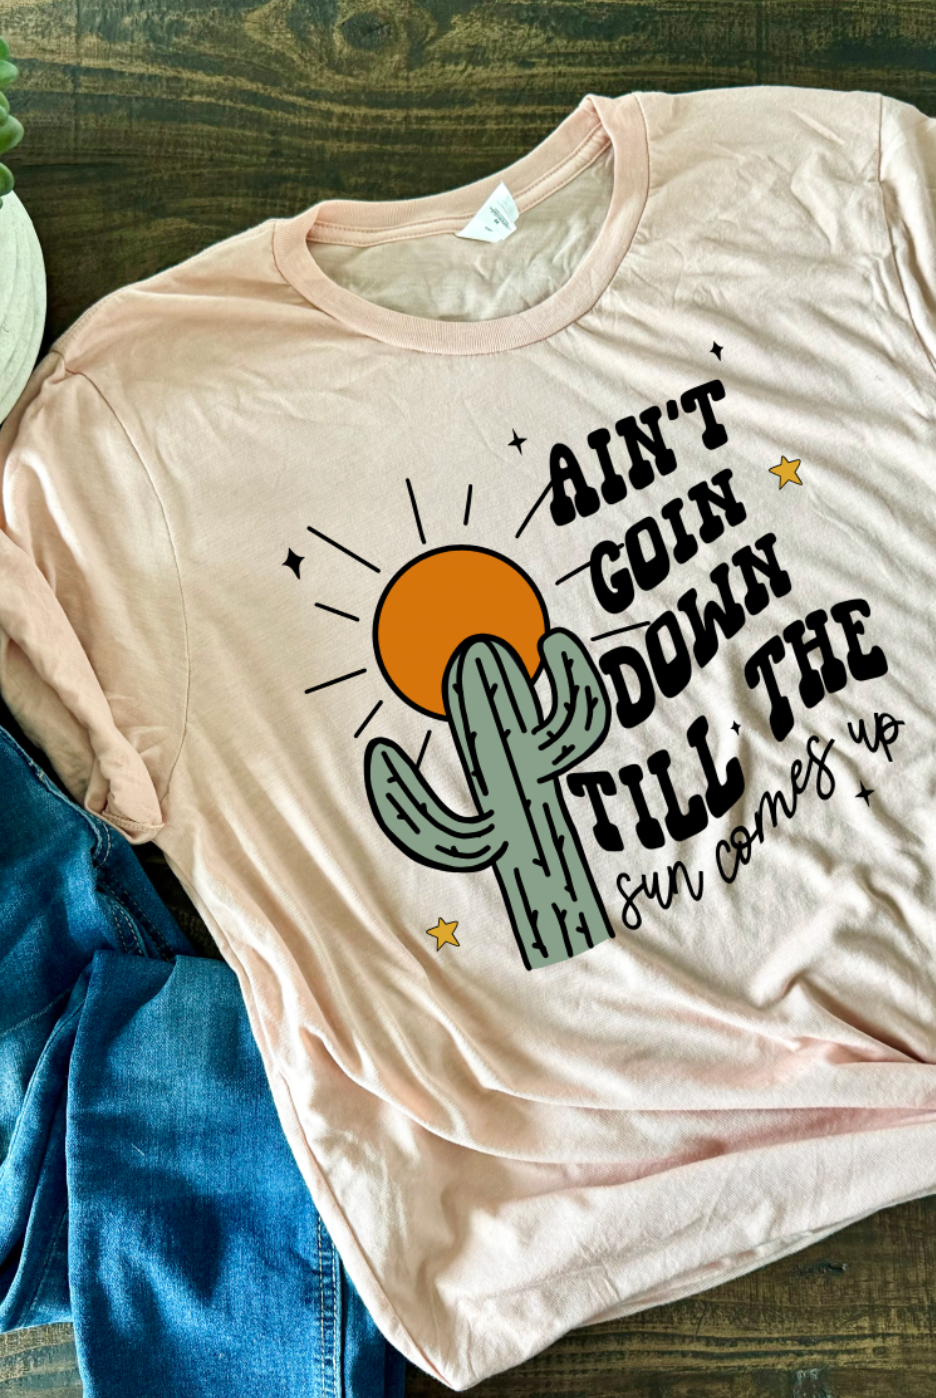 Peach Colored Bella and Canvas Unisex Tshirt with Ain't Goin Down Till The Sun Comes Up on it. Handmade in TX.